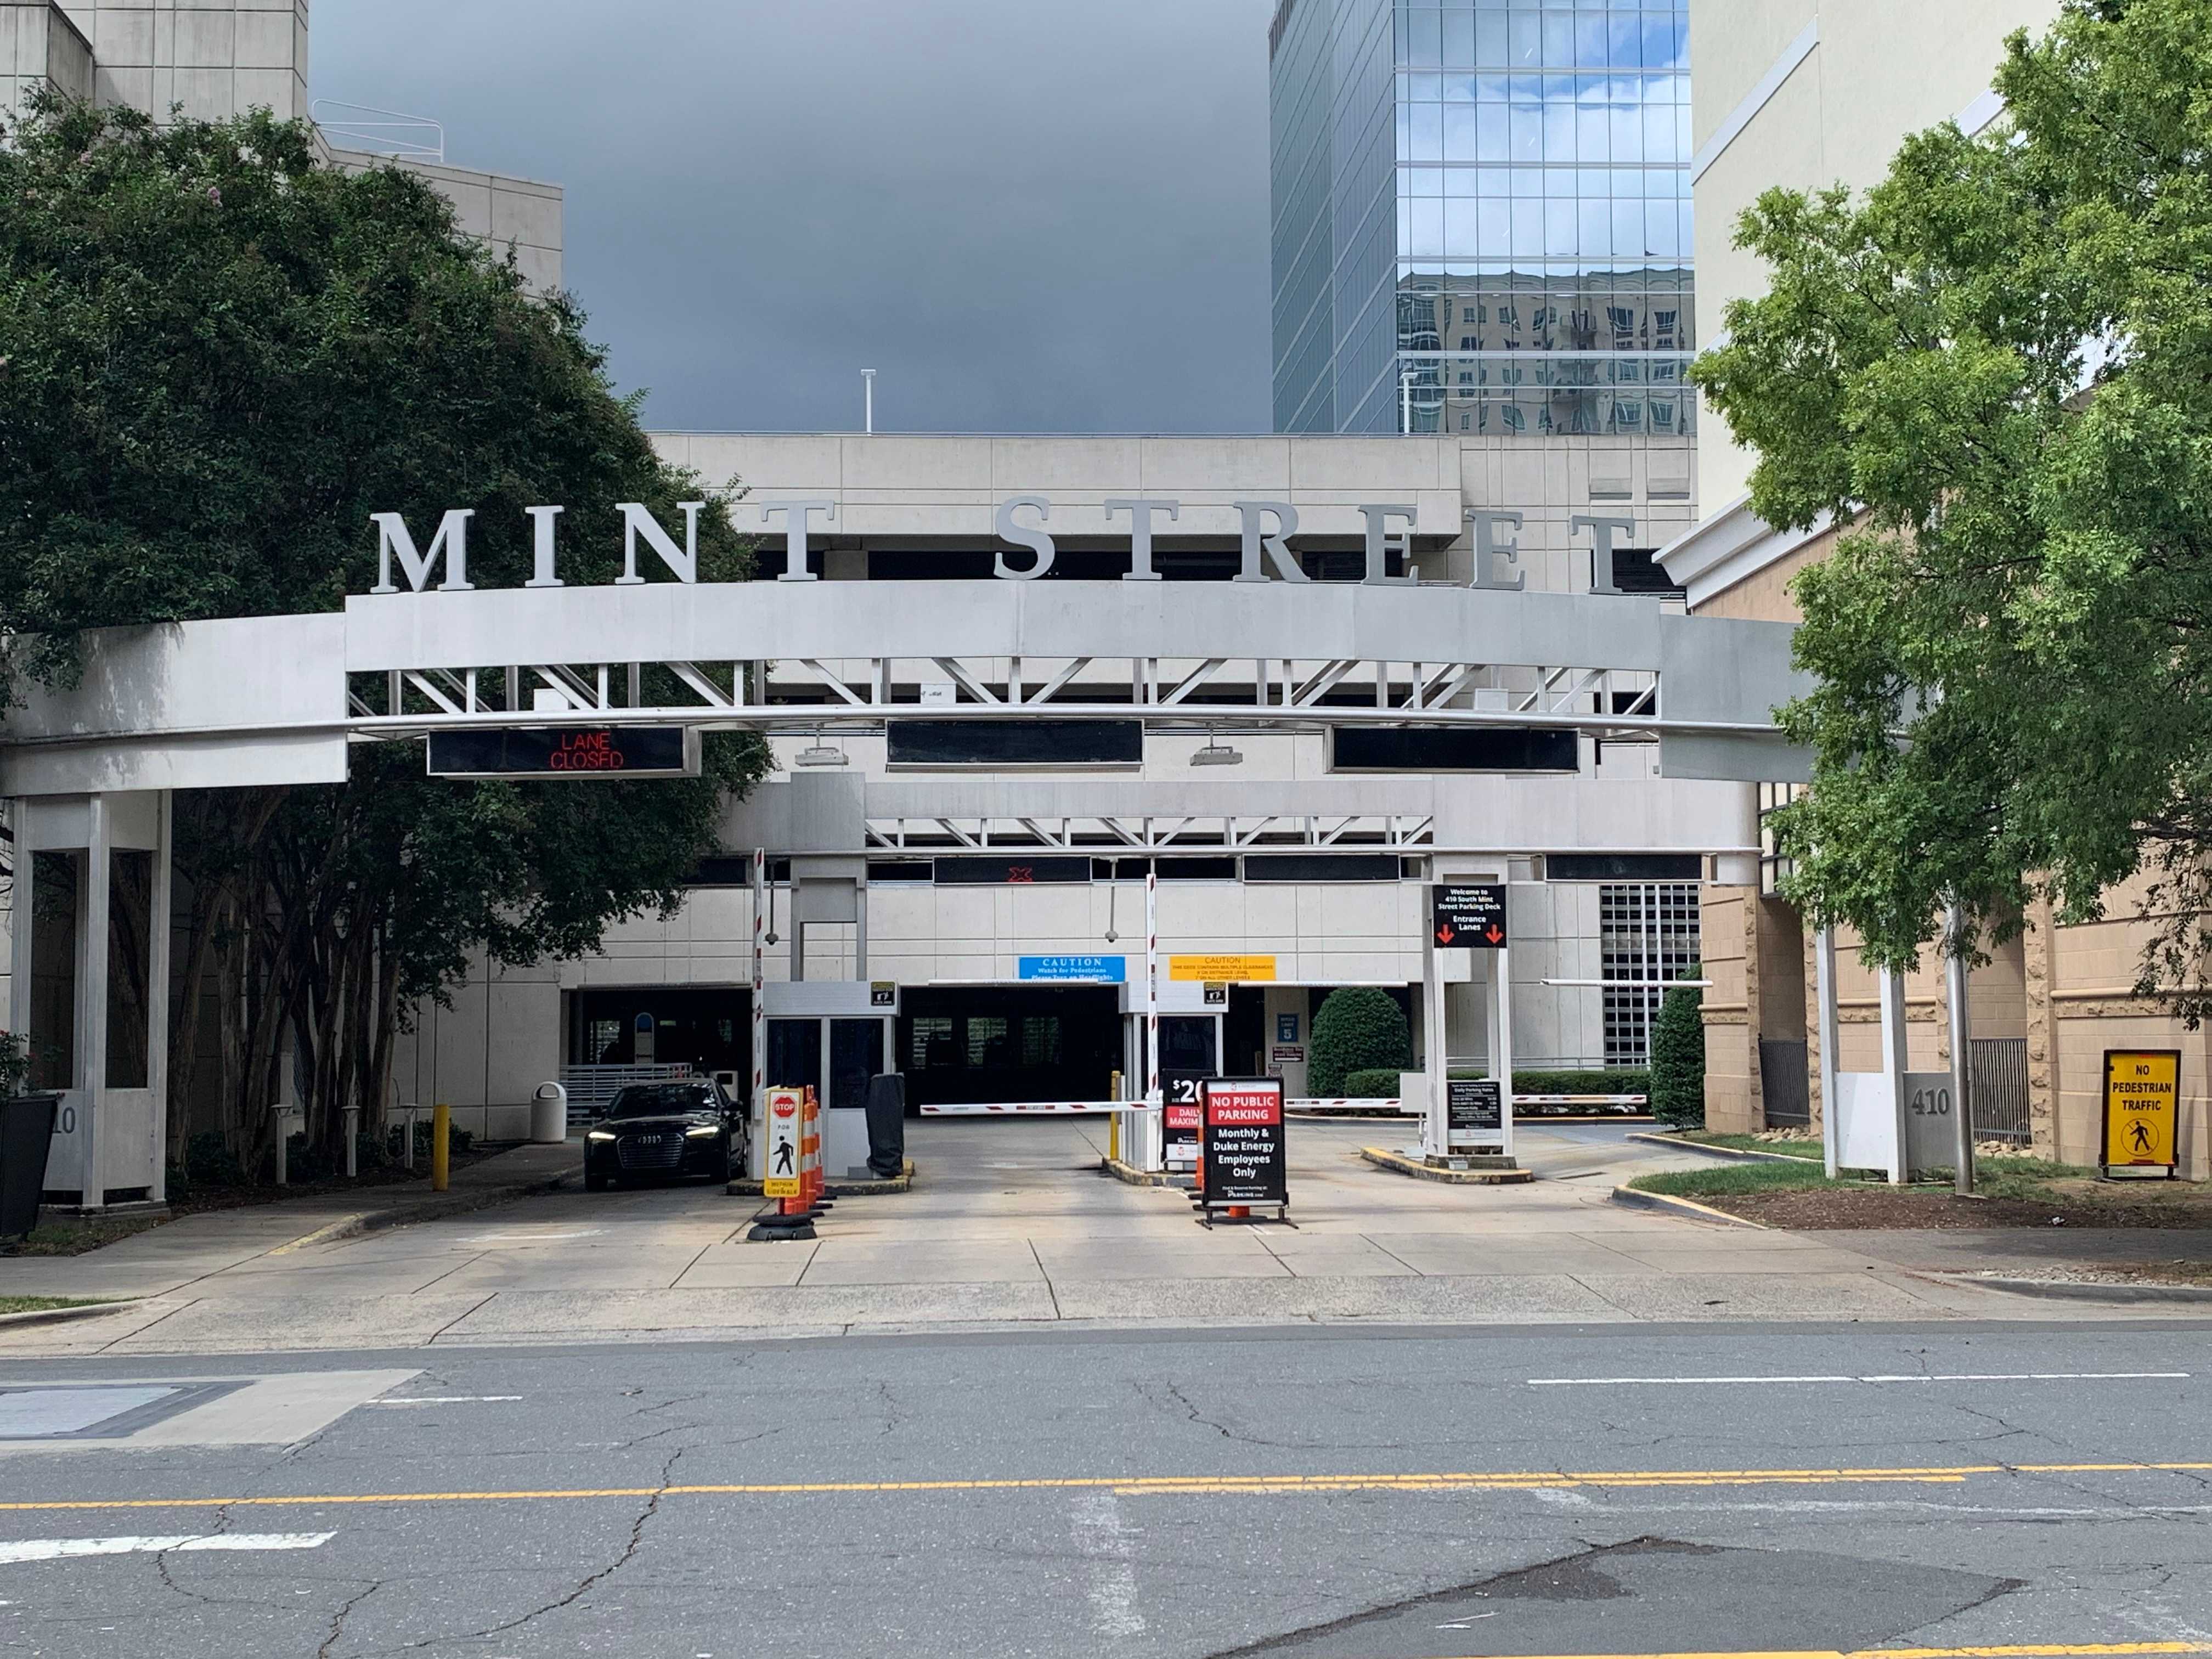 Mint Street Parking Deck - Duke Energy Employee Only (Monthly)  details